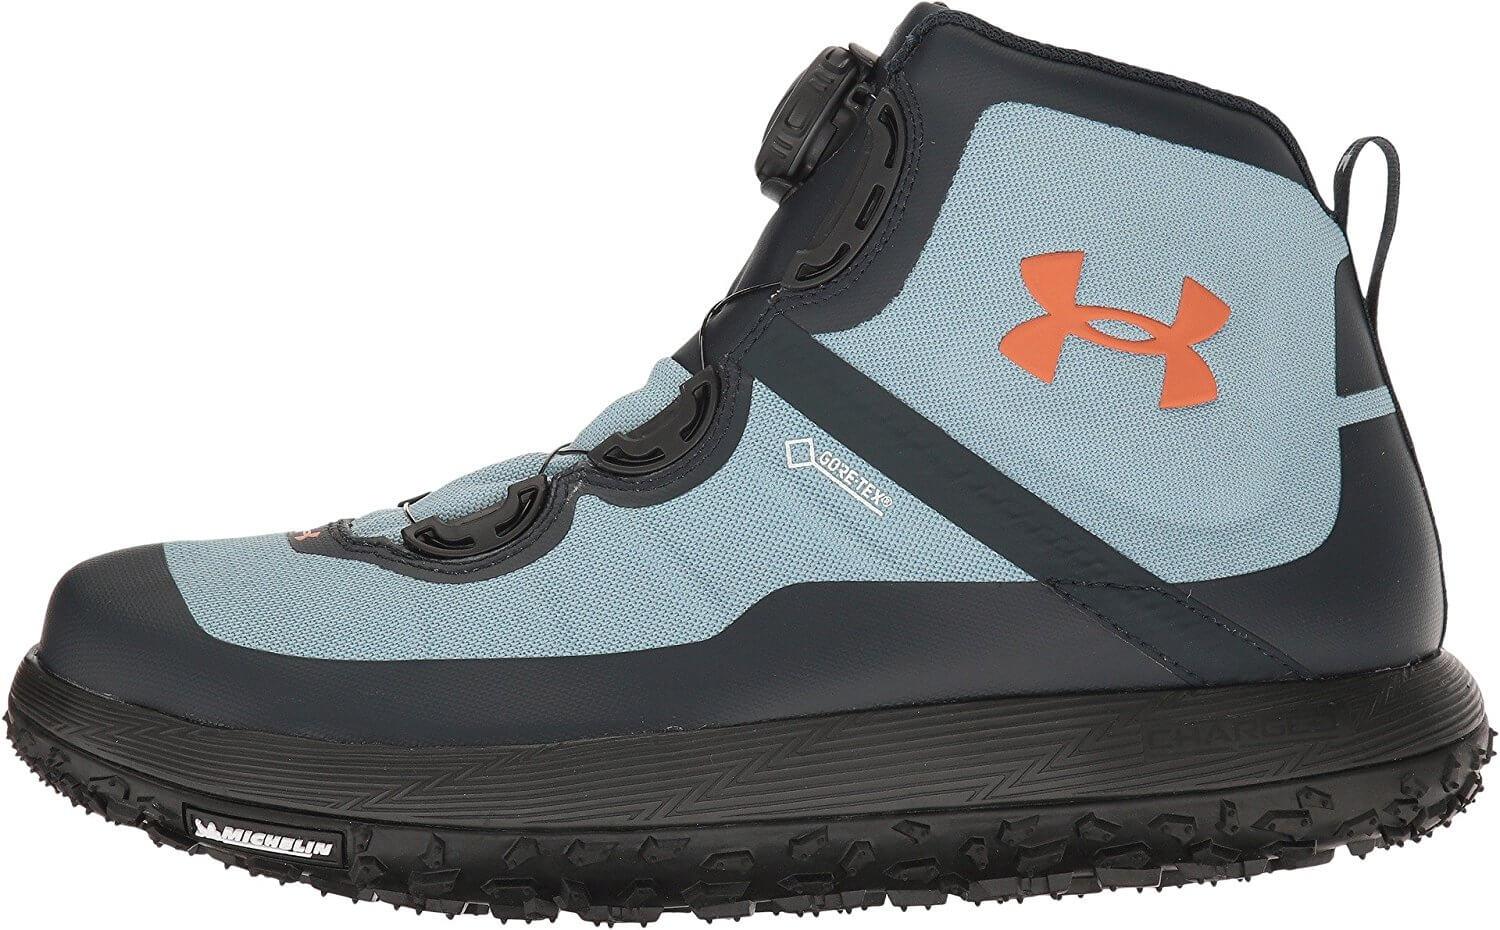 Under Armour Fat Tire GTX protects the entire foot